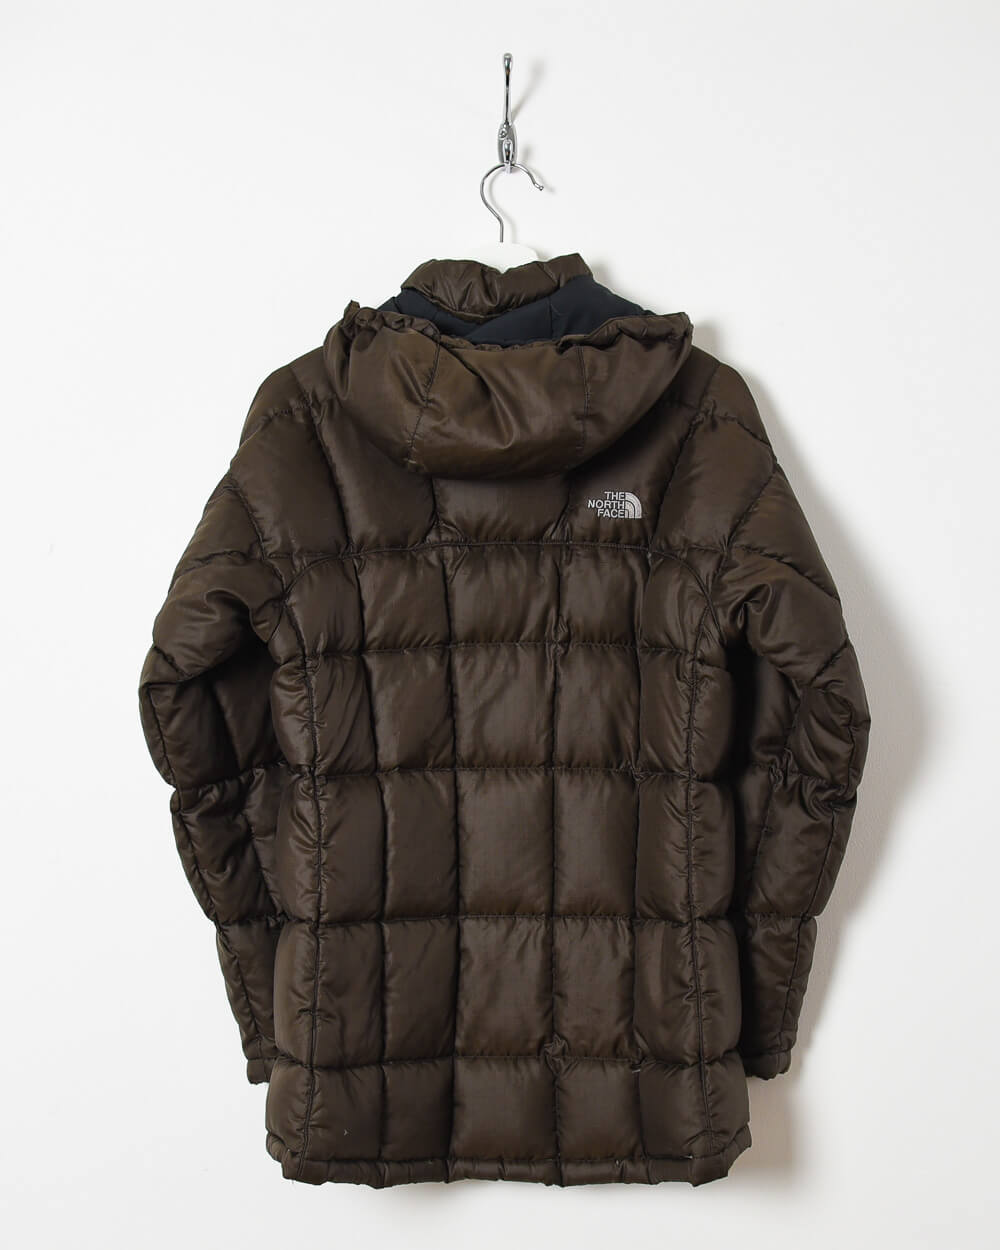 The North Face Women's Hooded Puffer Jacket - Small - Domno Vintage 90s, 80s, 00s Retro and Vintage Clothing 